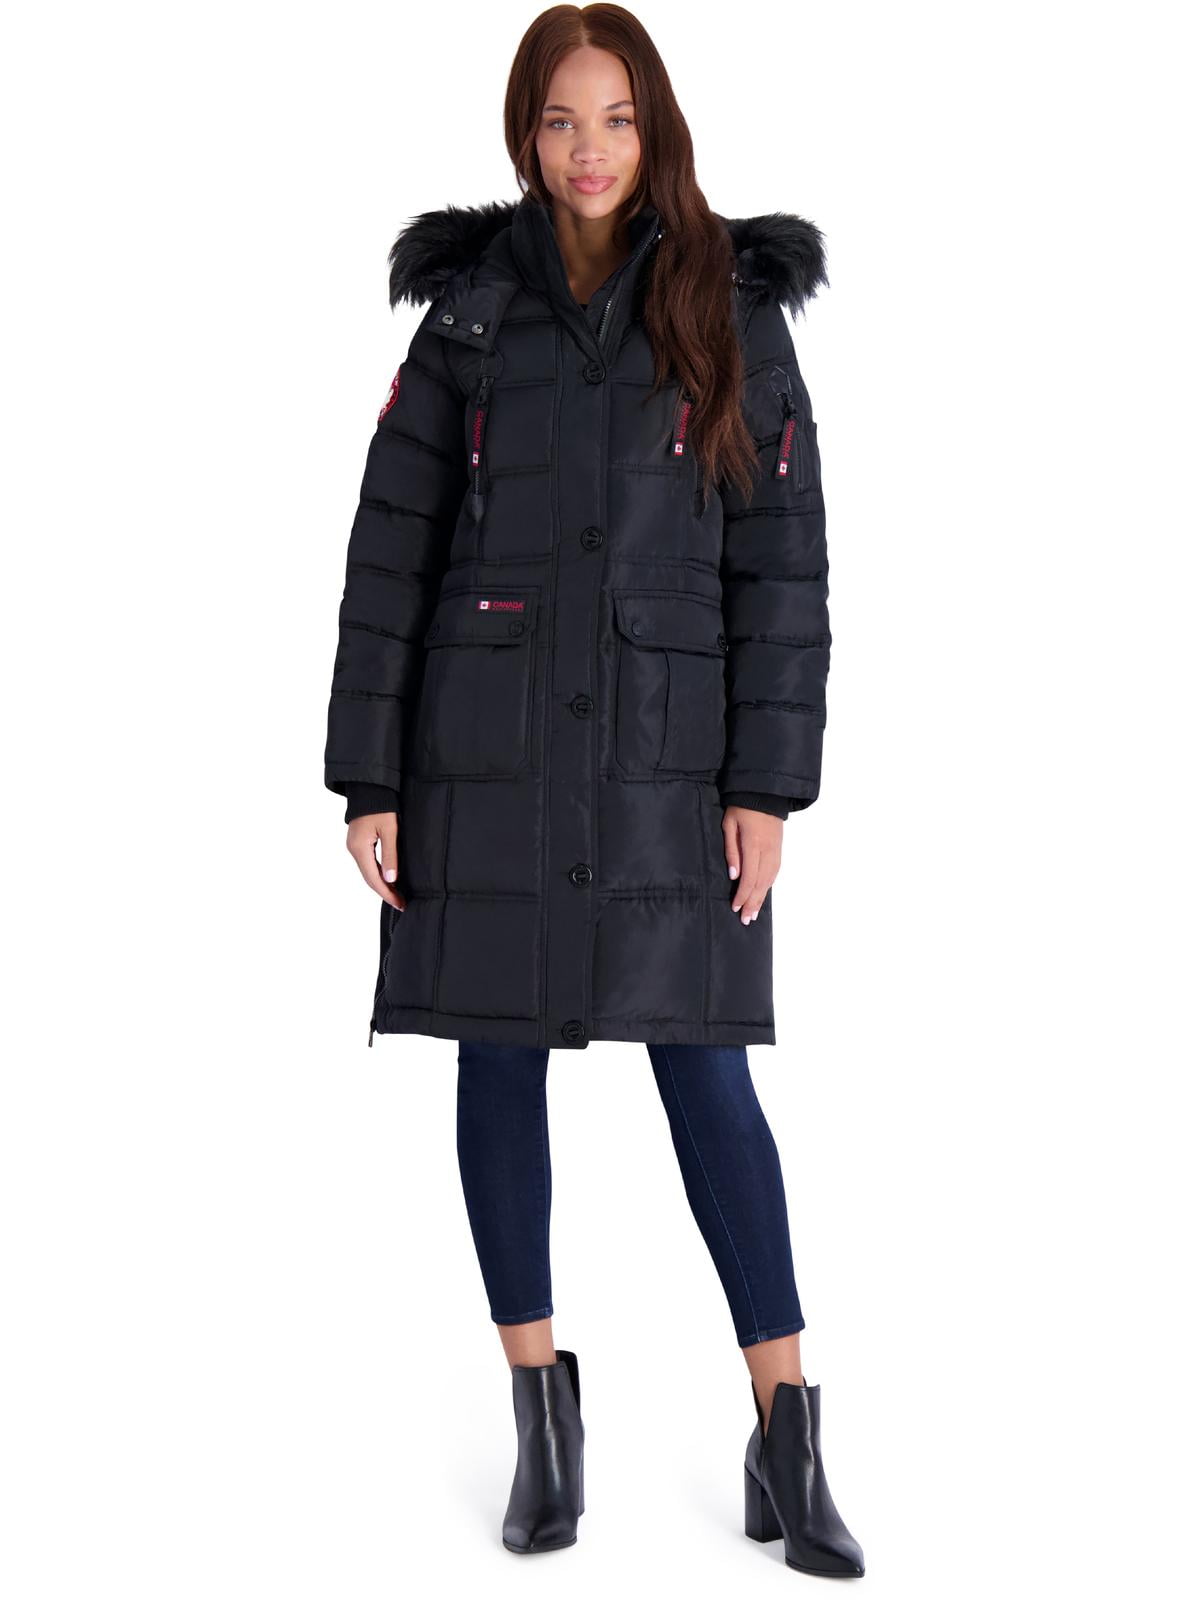 canada weather gear Long Cold Weather Parka Coat in Black